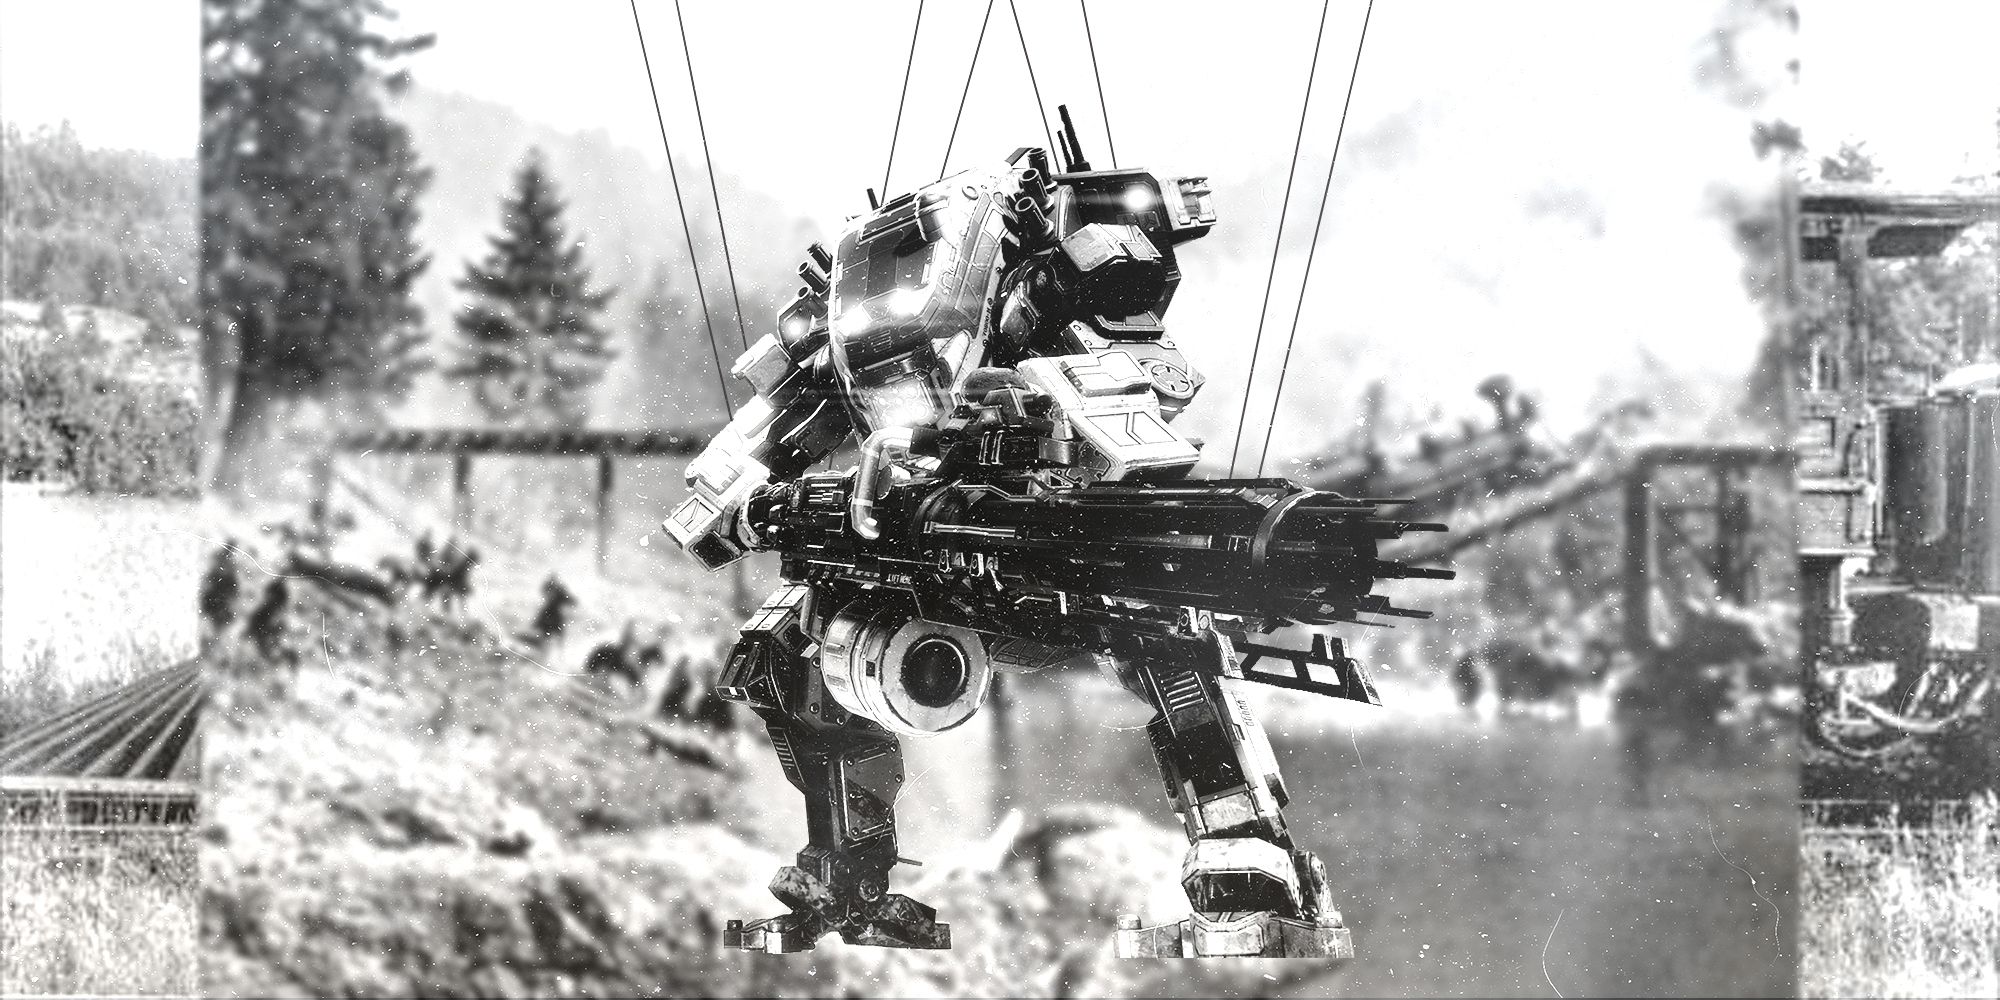 TItanfall mech in Buster Keaton's The General